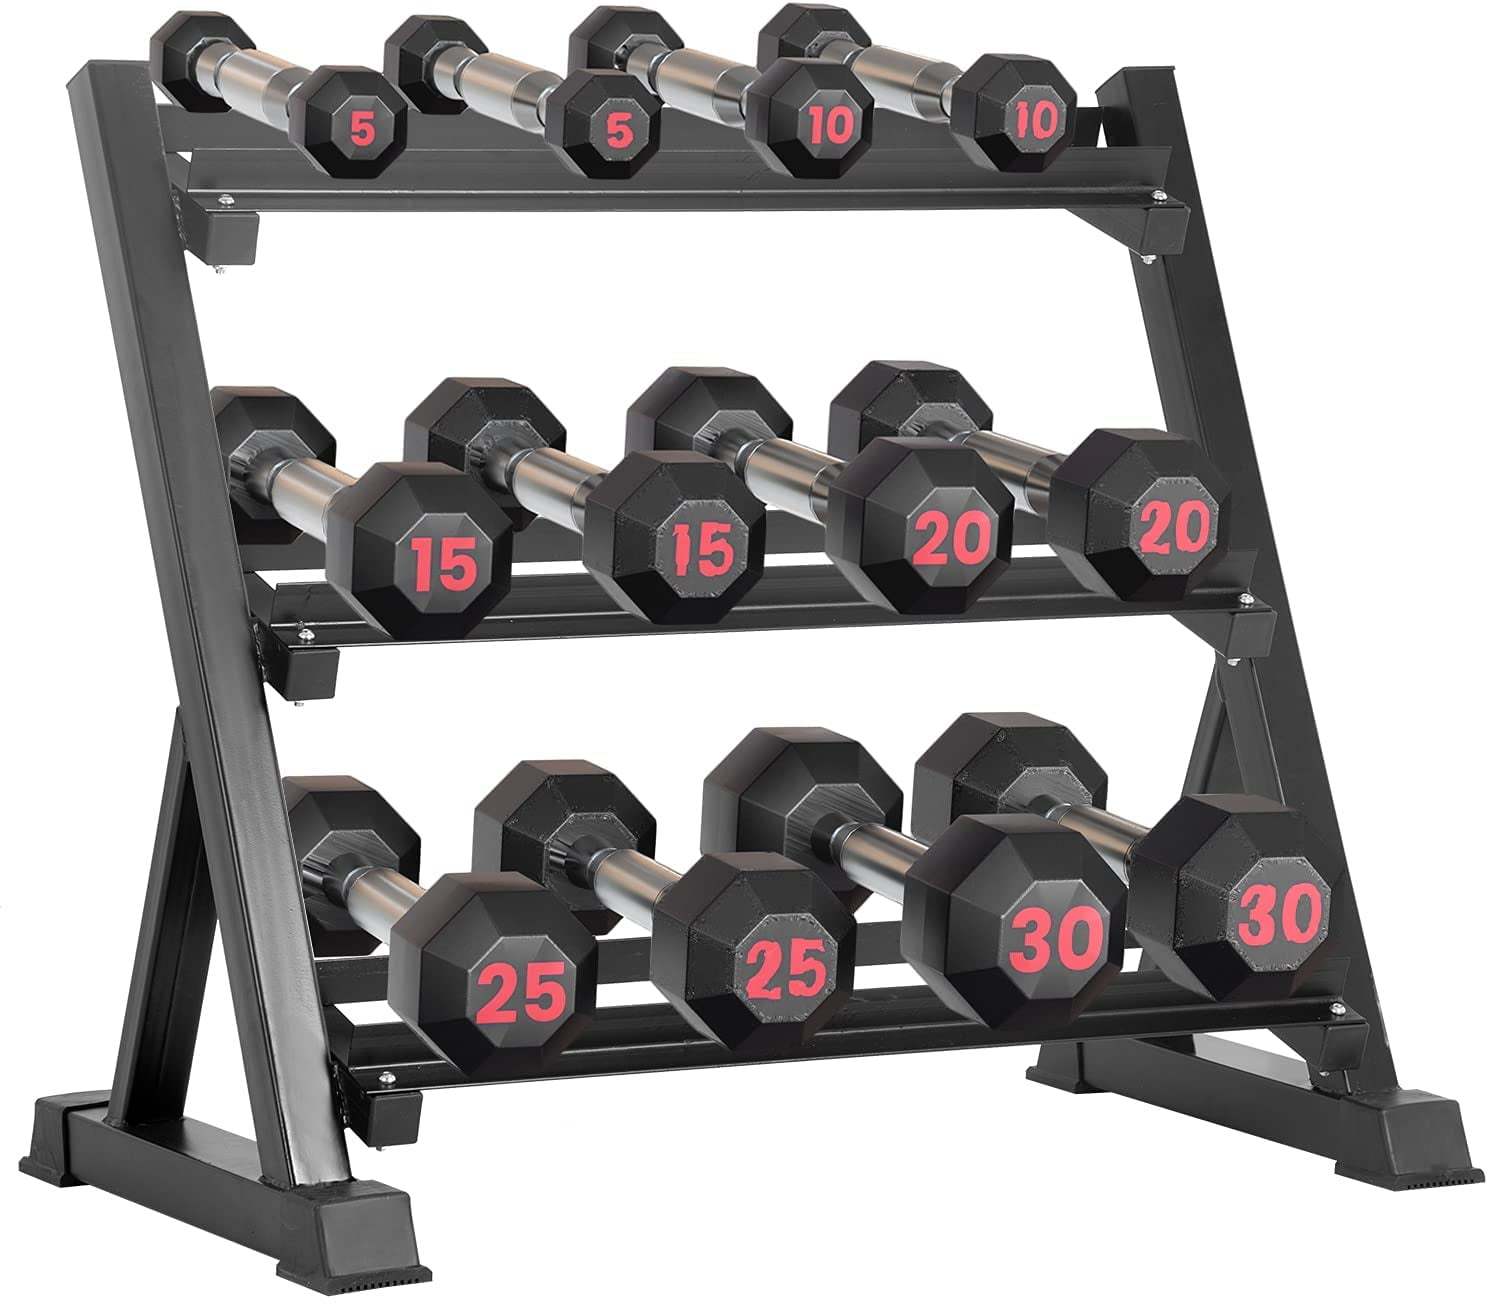 Dumbbell Holder Rack or Home Gym Dumbbells Rack Woueniut Adjustable 3-Tier Weight Storage Organizer Weight Rack for Dumbbells 1100lbs Capacity 